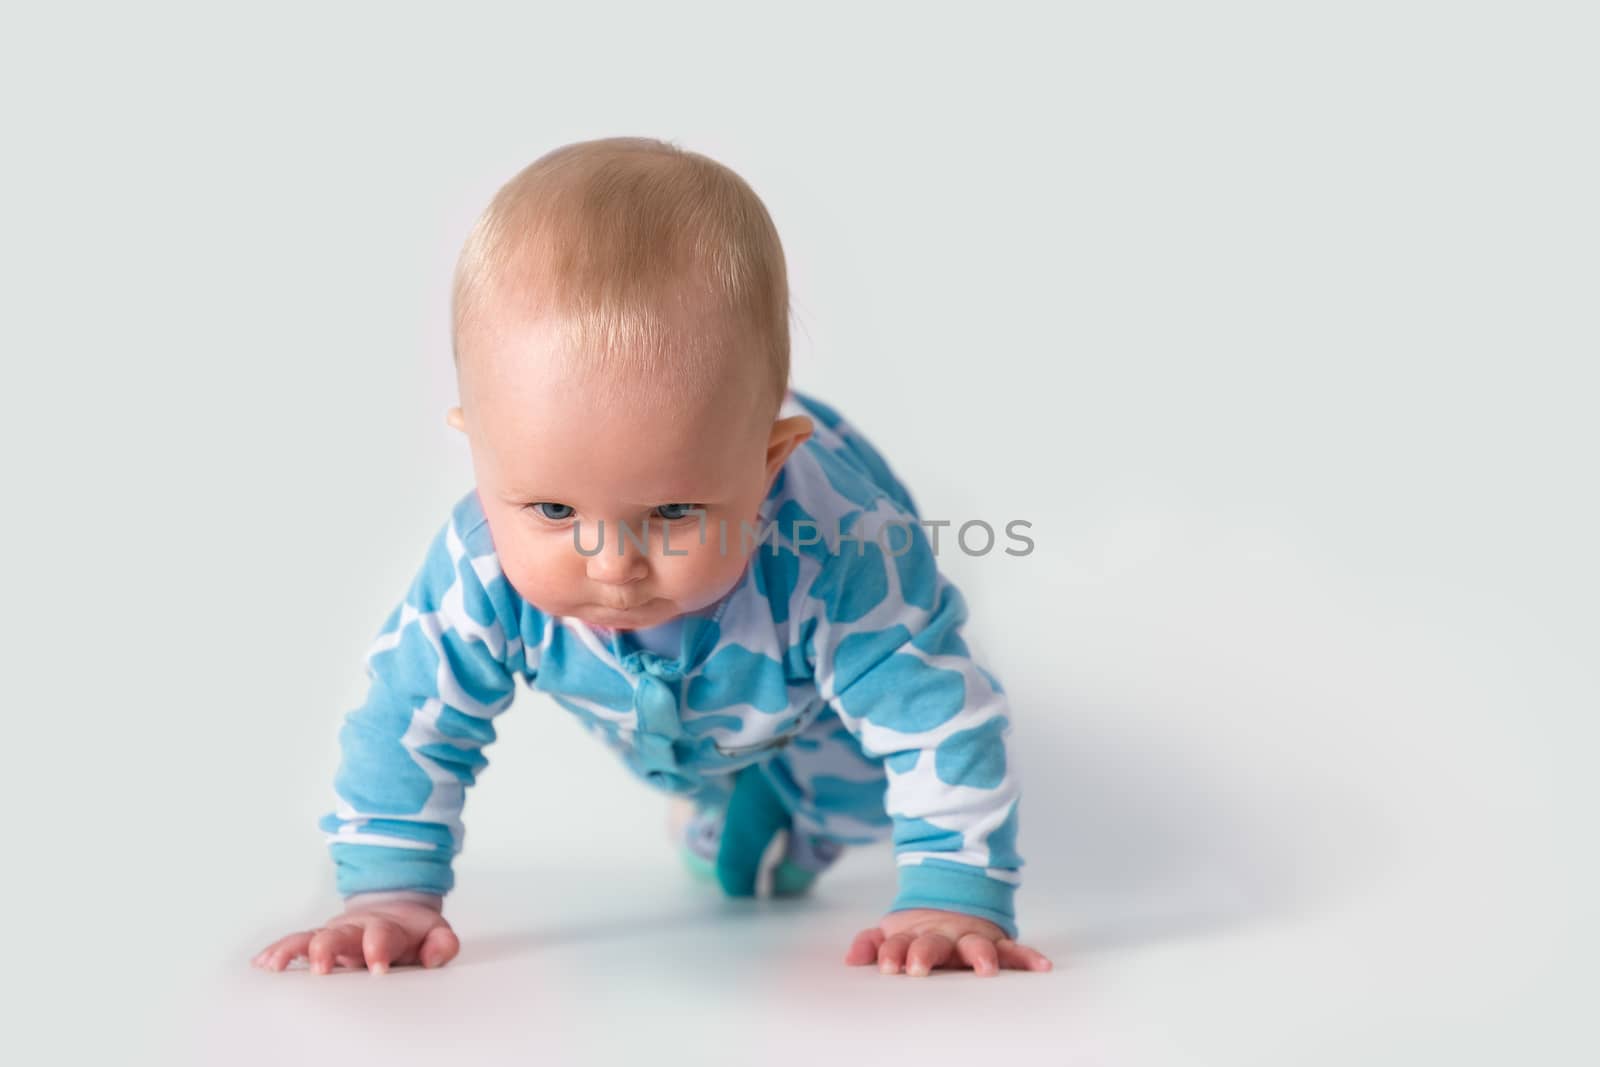 Baby in blue polka pajama concentrating on doing push-ups